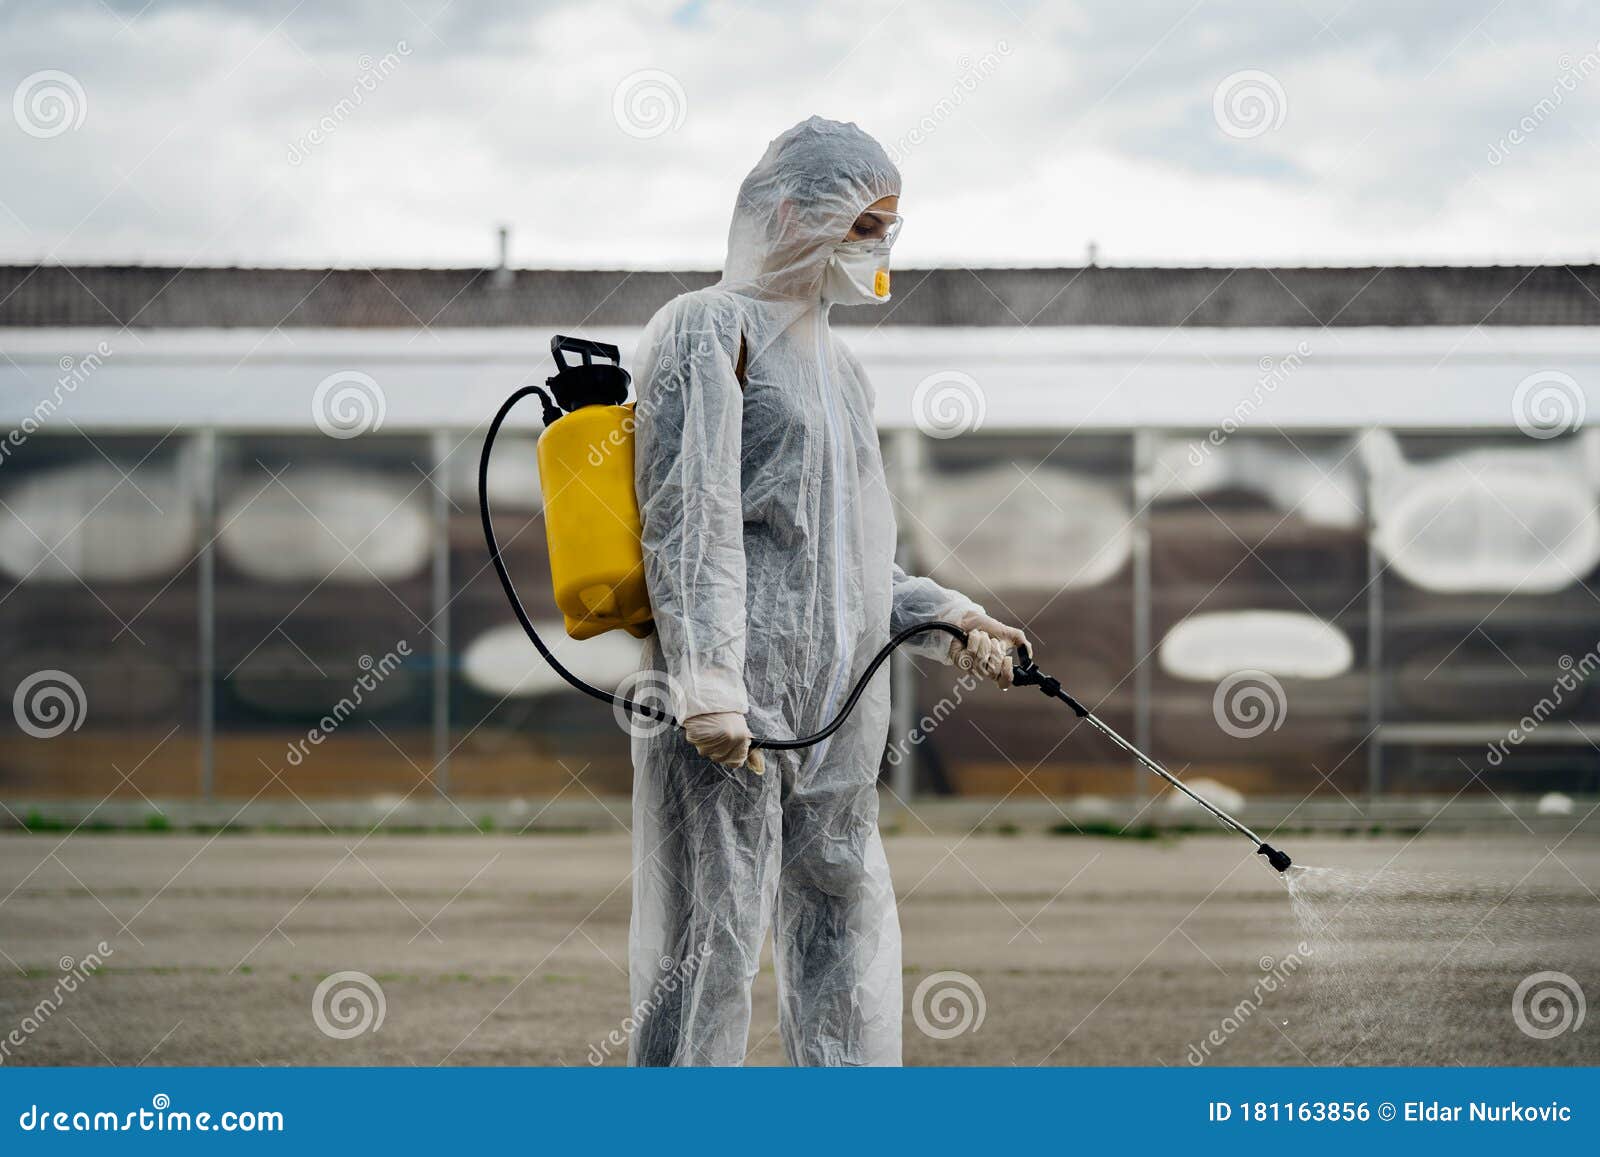 sanitation worker in hazmat protection suit and n95 mask with chemical decontamination sprayer tank.disinfecting streets and